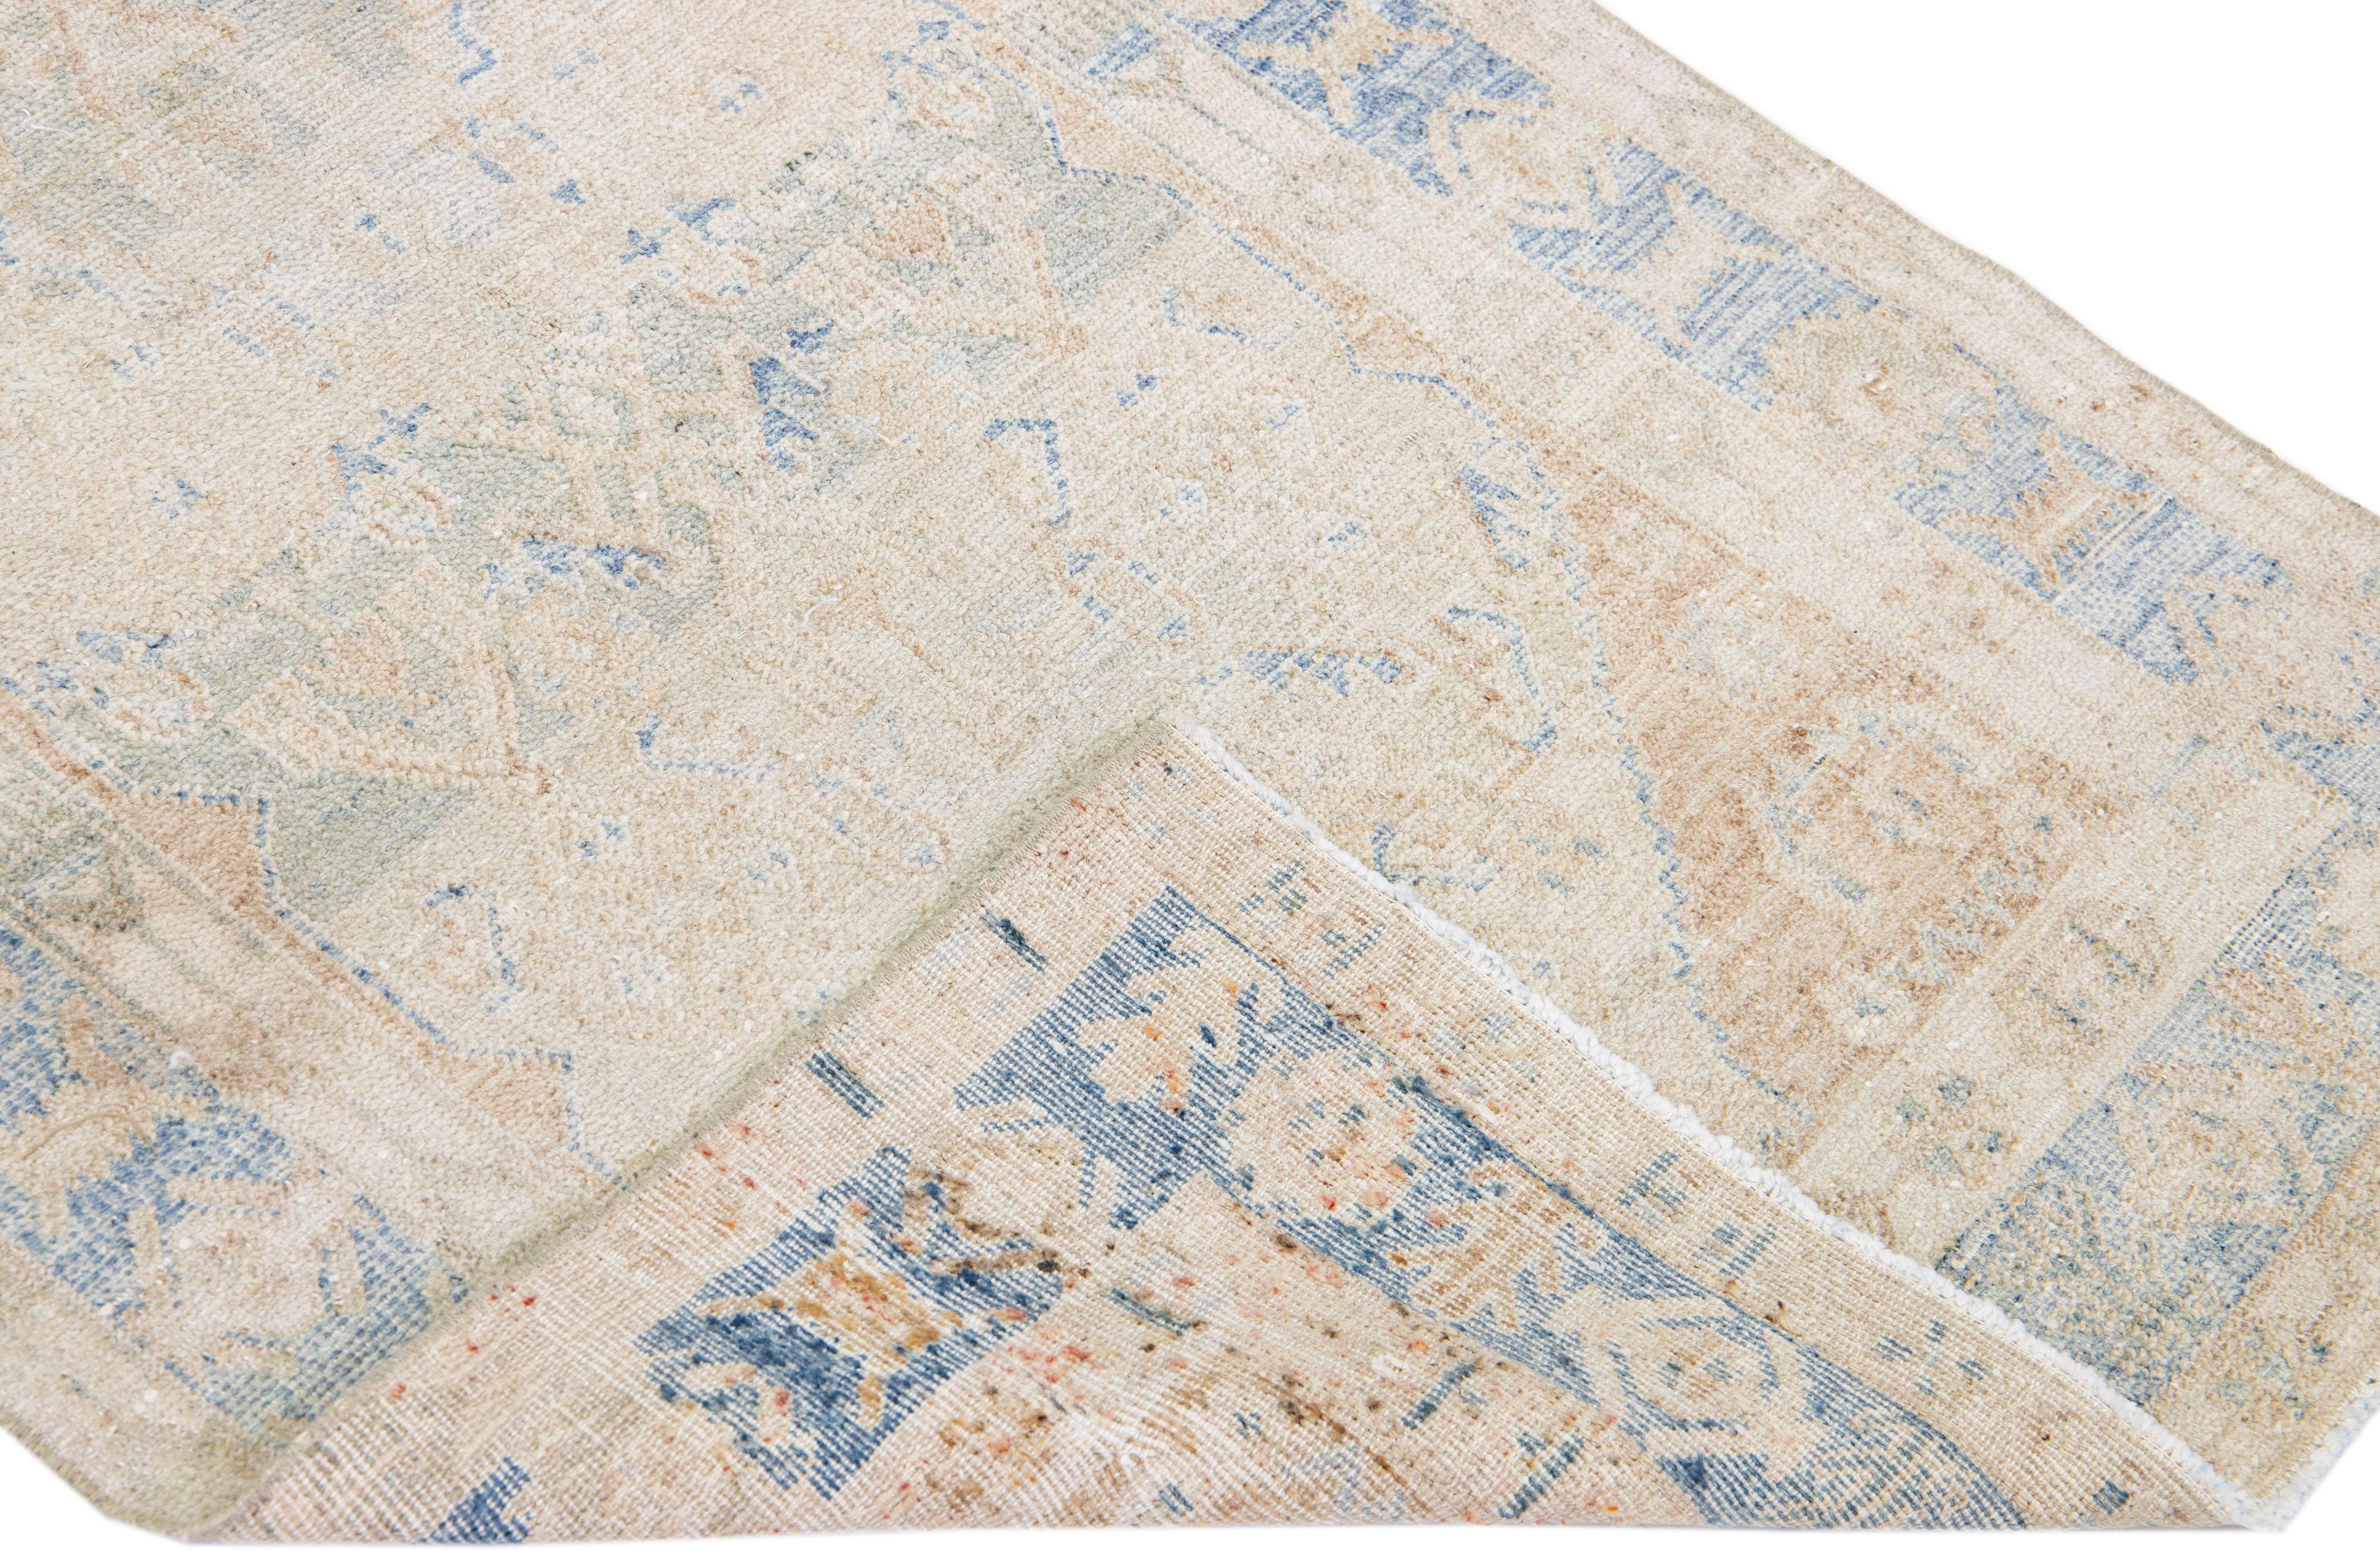 Beautiful antique Heriz hand-knotted wool runner with a beige and blue field. This Persian rug has a blue frame and accents in a gorgeous allover pattern design.

This rug measures: 3'2